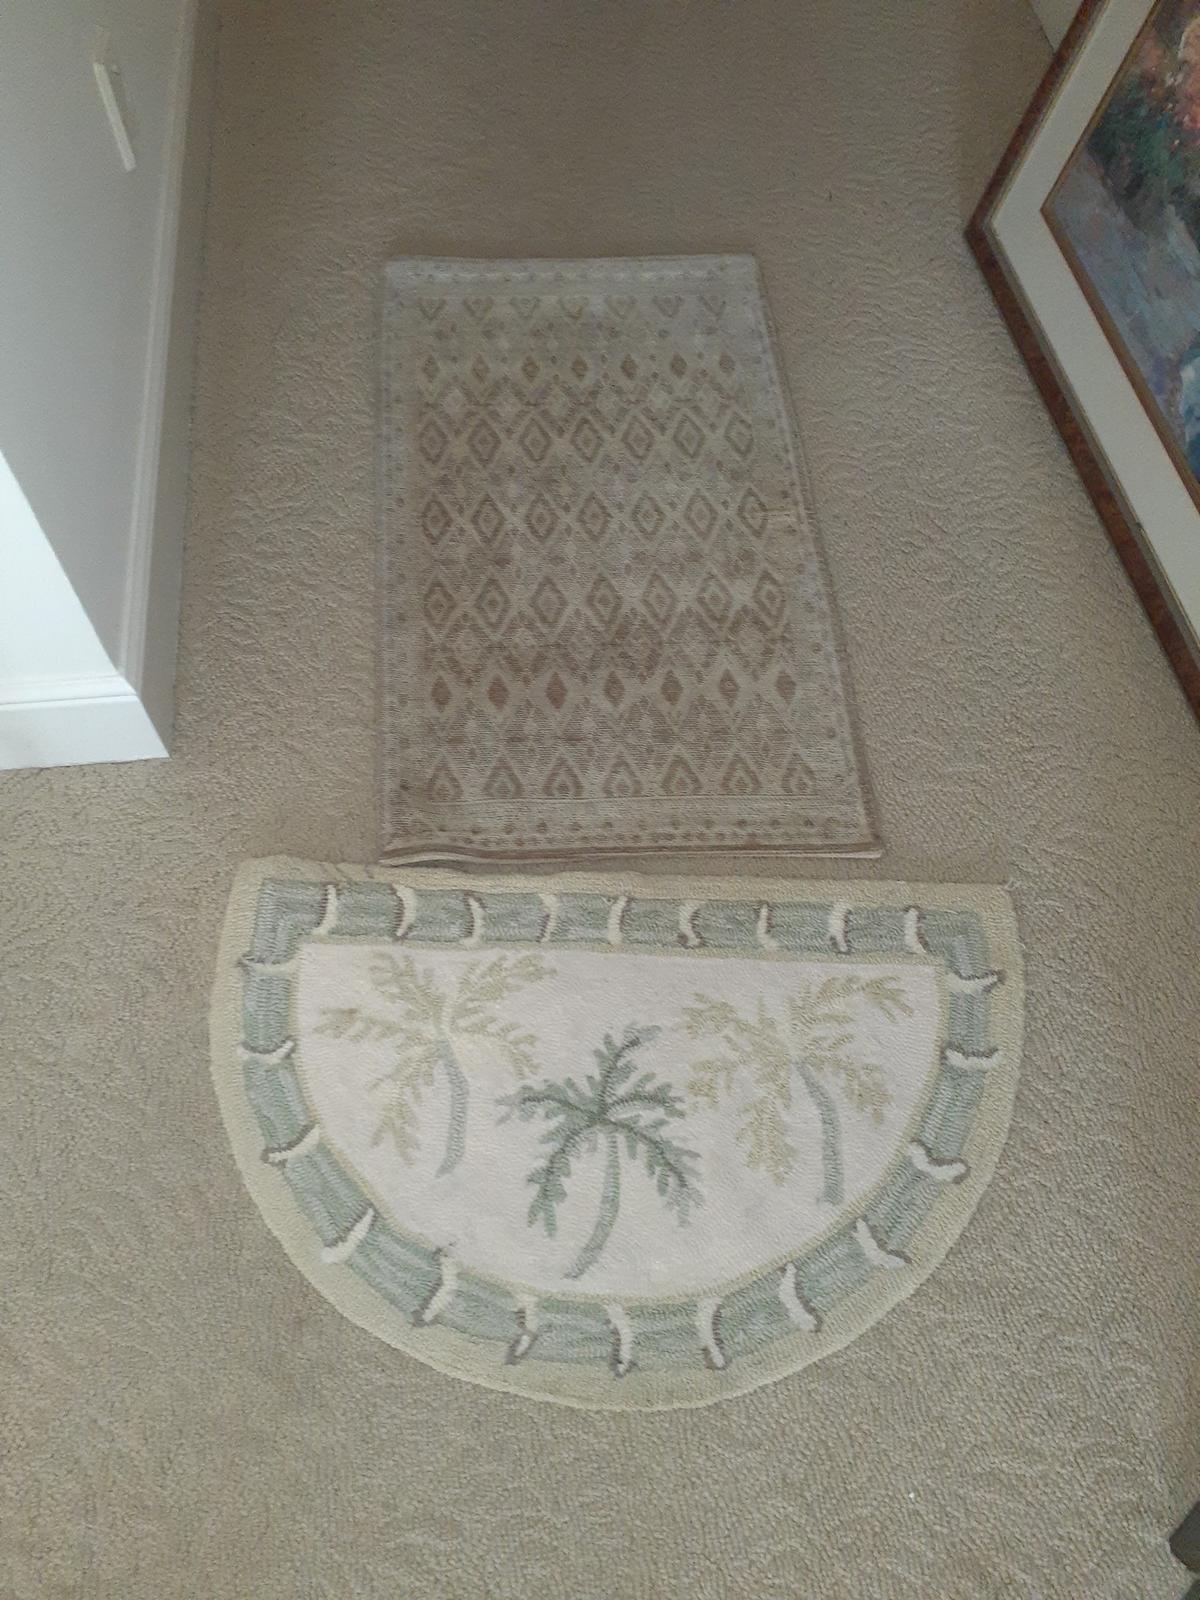 3 small rugs